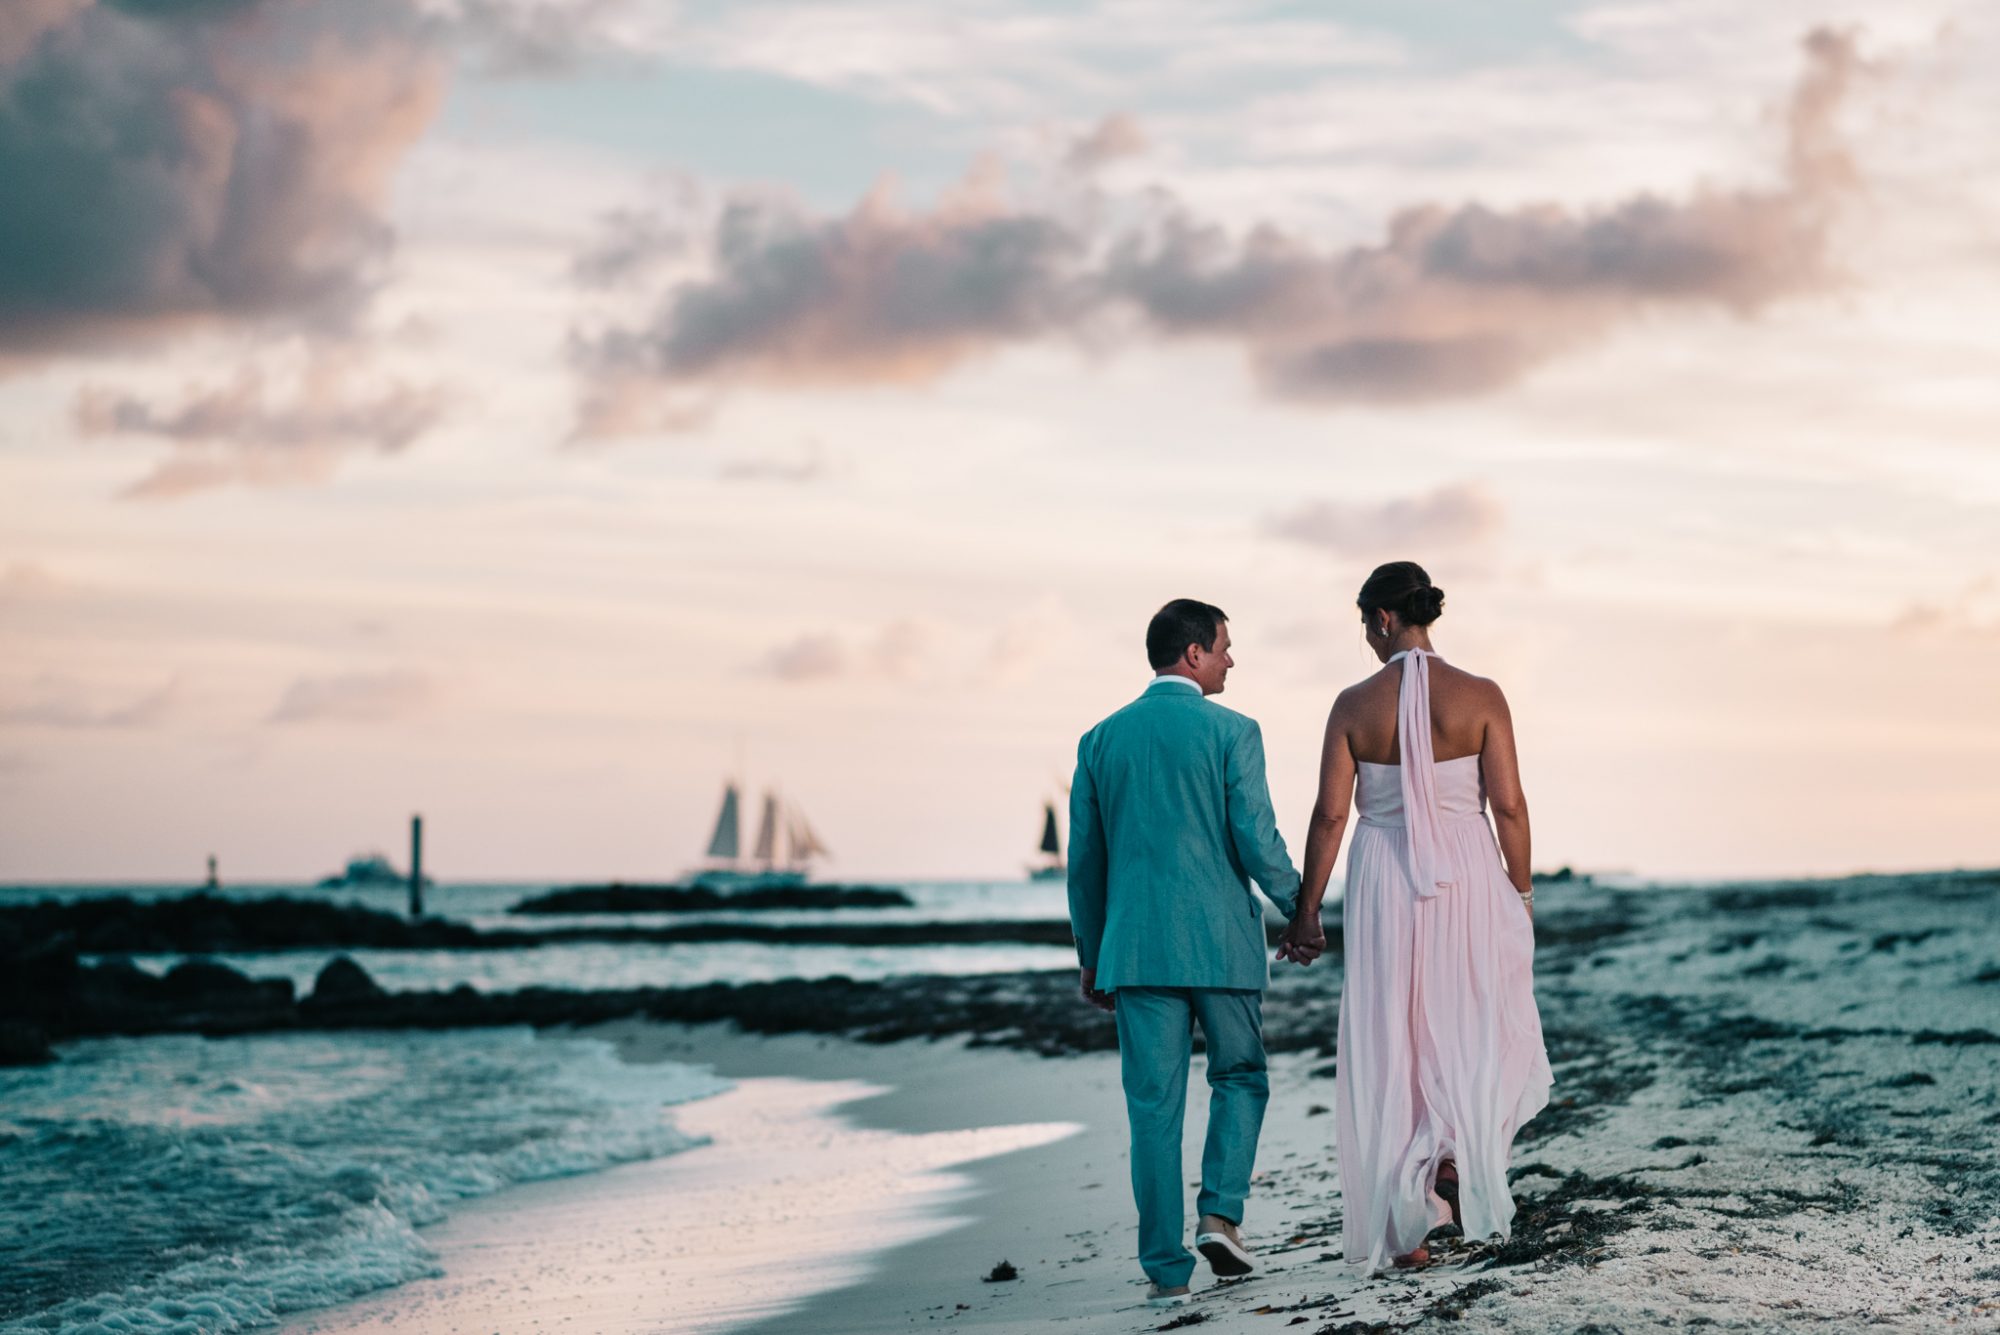 Freya and Jamie's Key West wedding: A bride and groom walking on the beach at sunset.